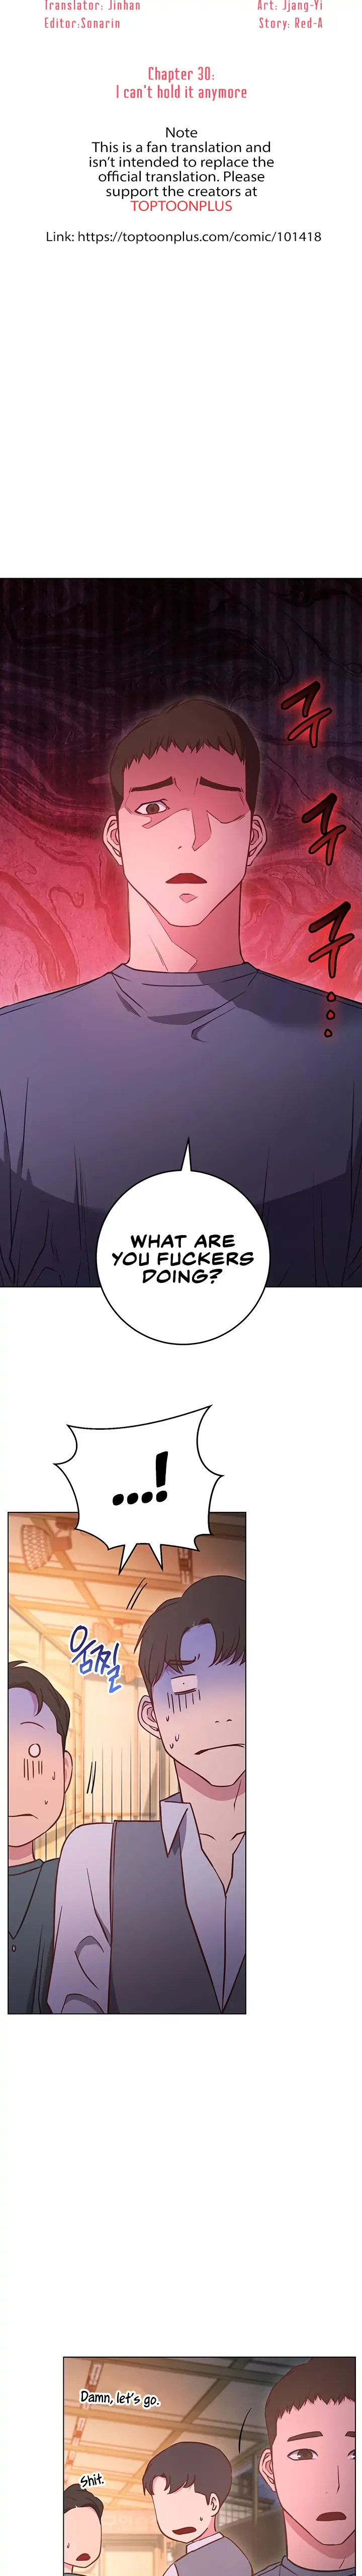 How About This Pose? - Chapter 30 Page 2